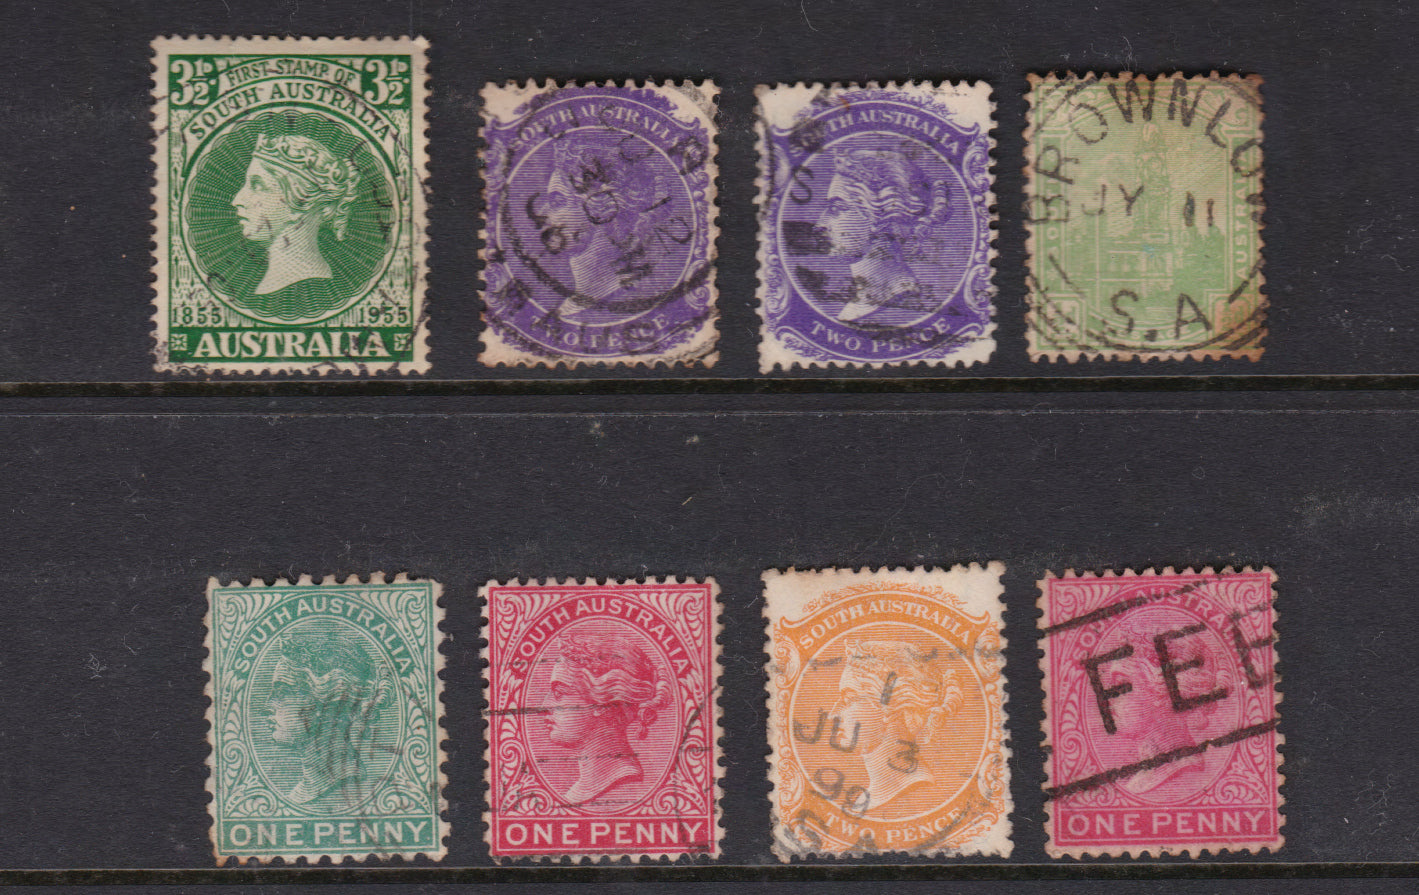 South Australian State Stamp Collective (Eight Stamps)